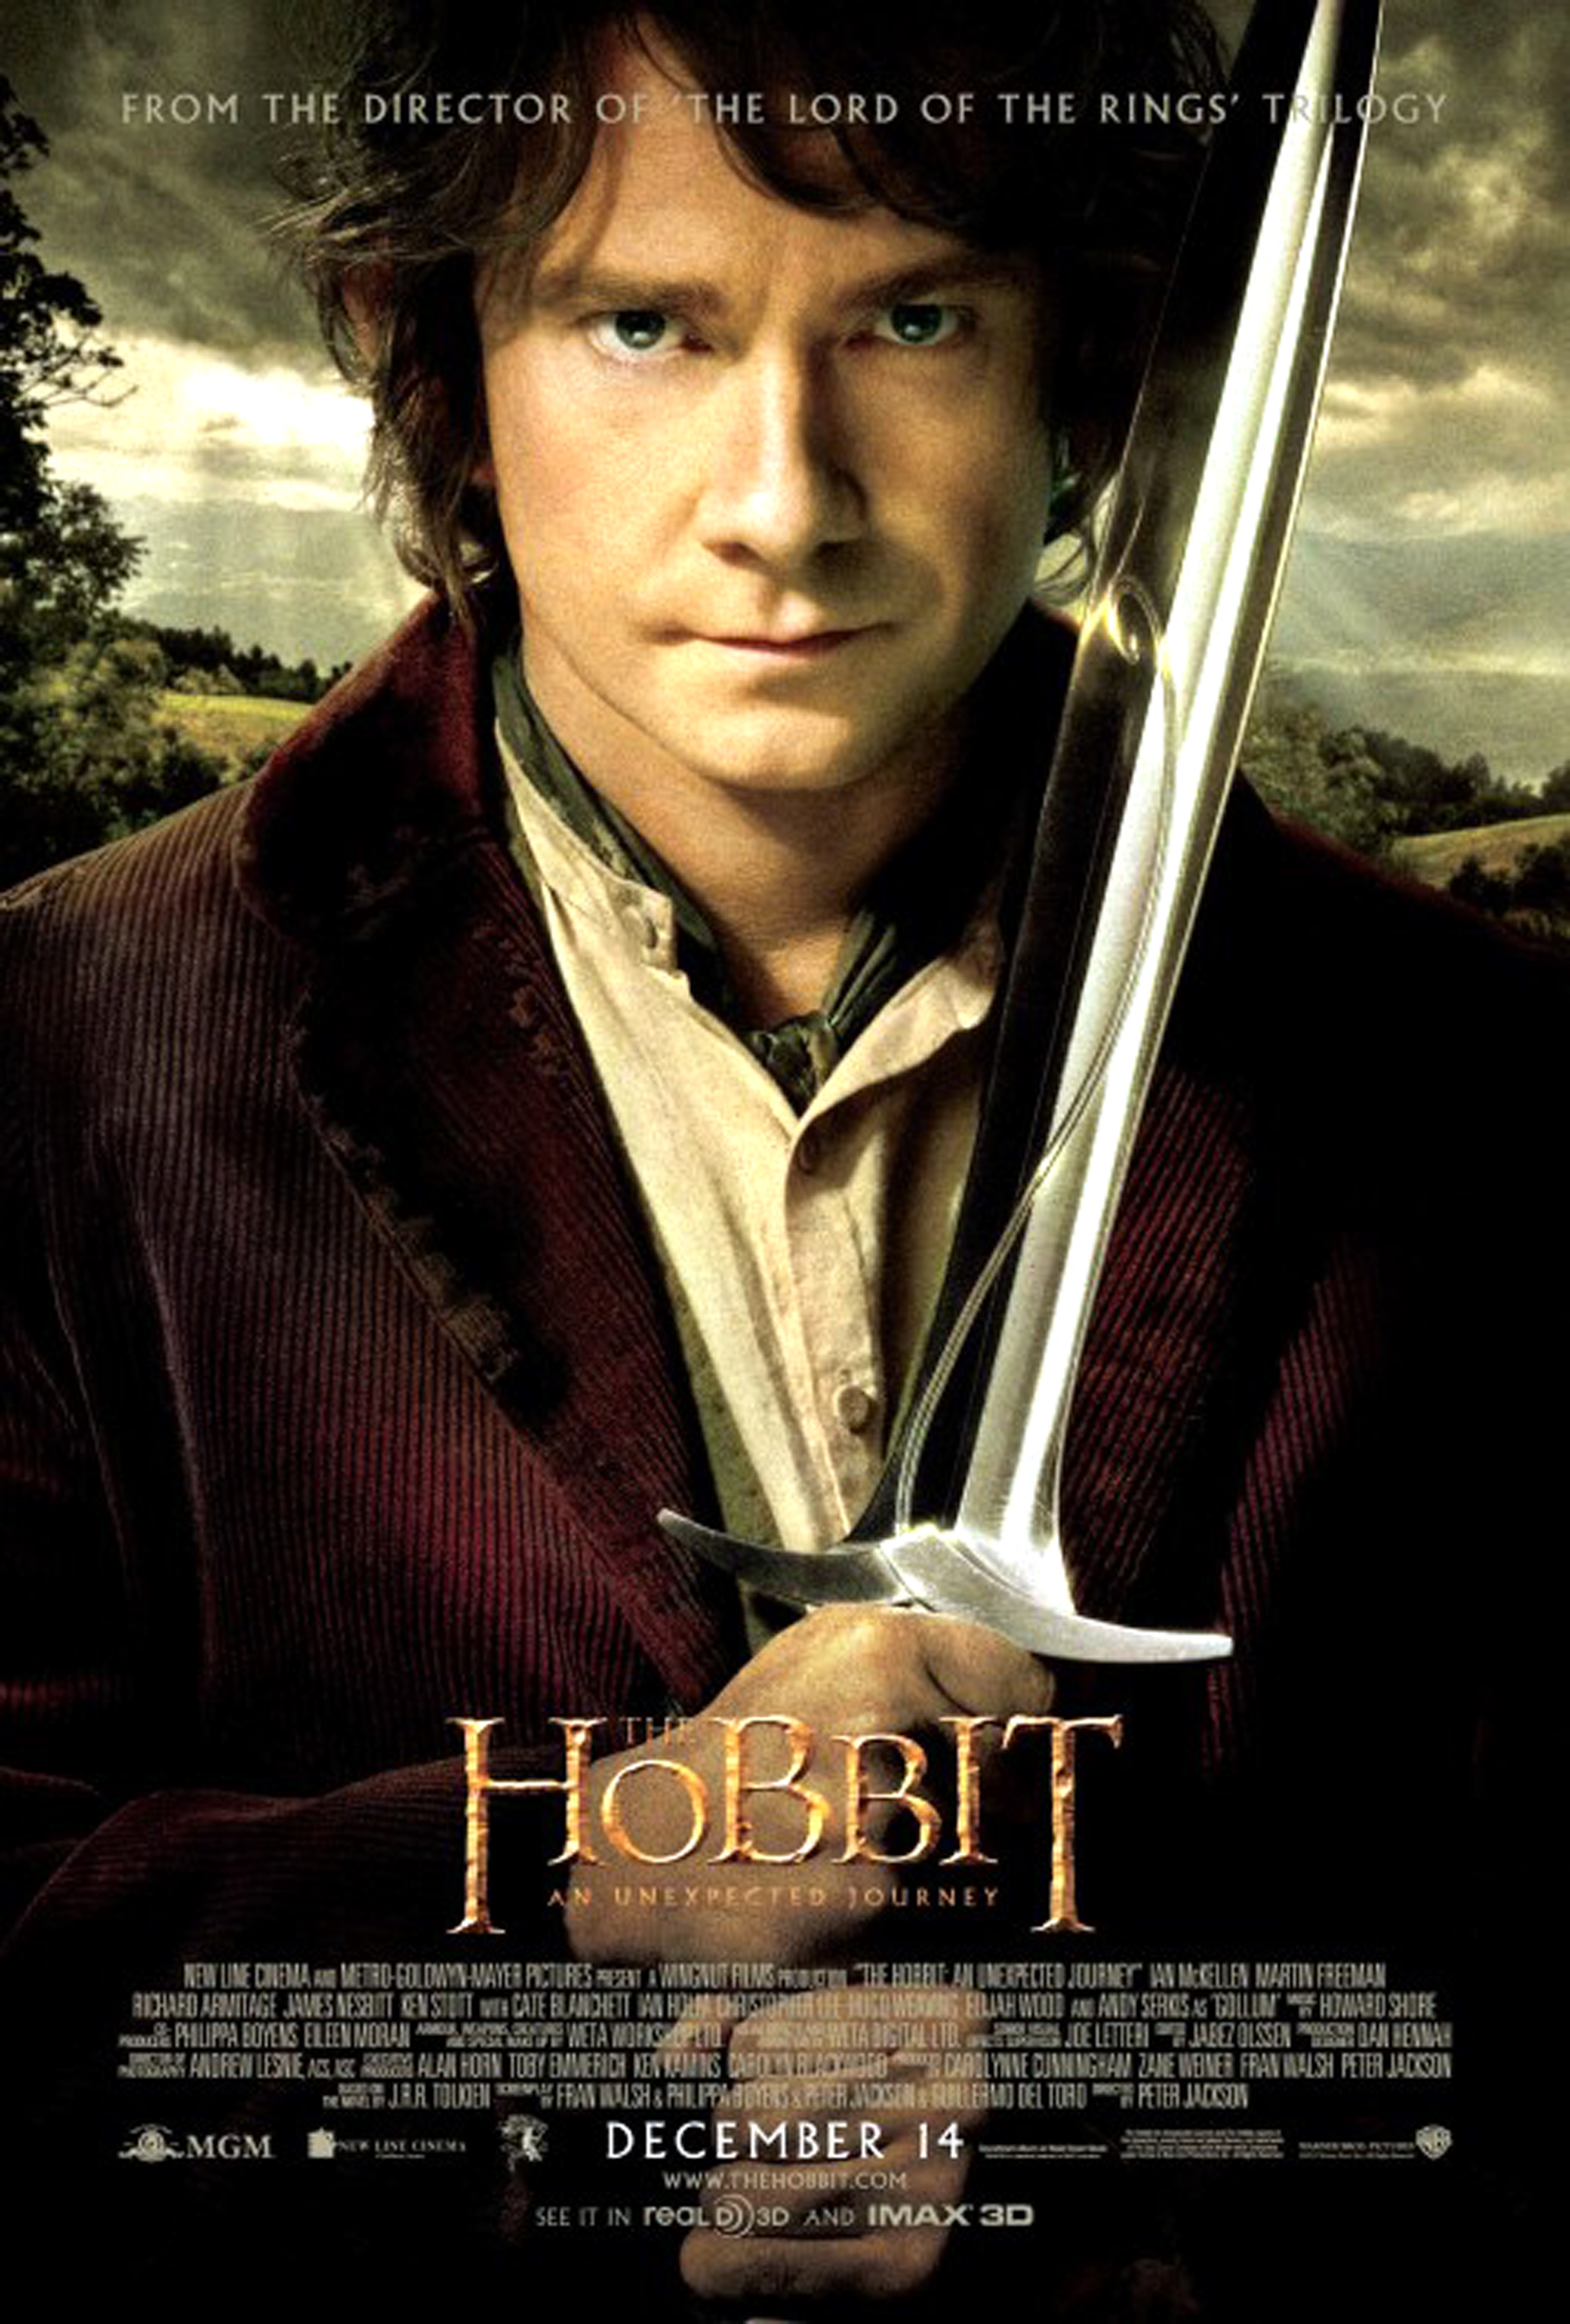 The Hobbit: An Unexpected Journey - Movie Poster #2 (Original)